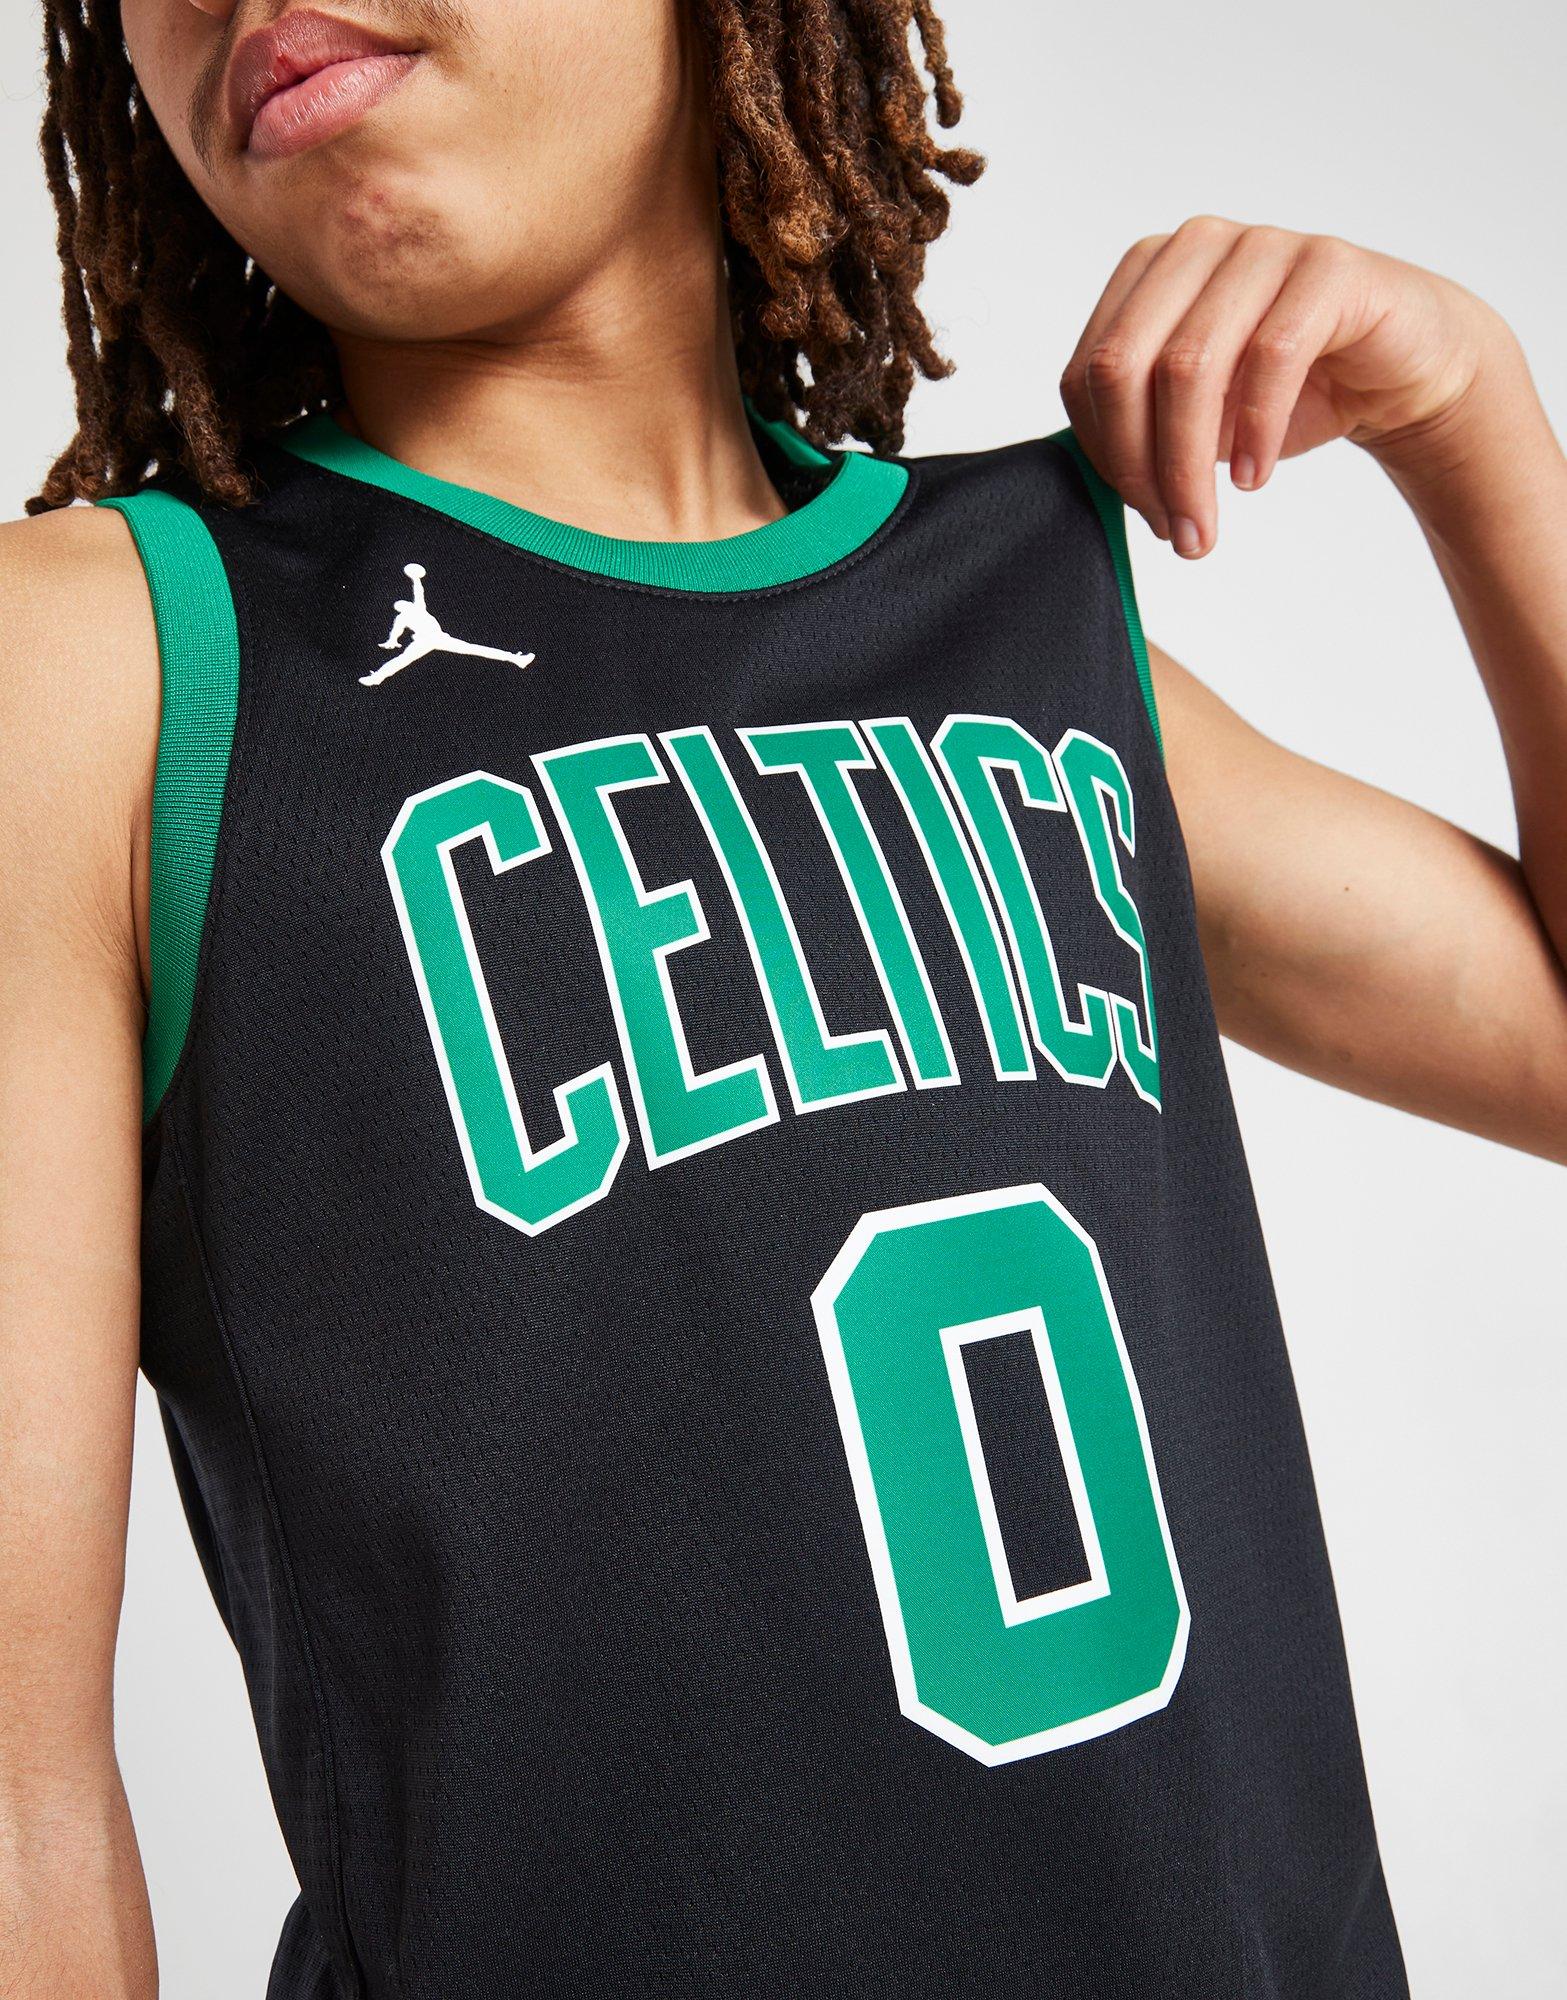 Order your Boston Celtics Nike City Edition gear today